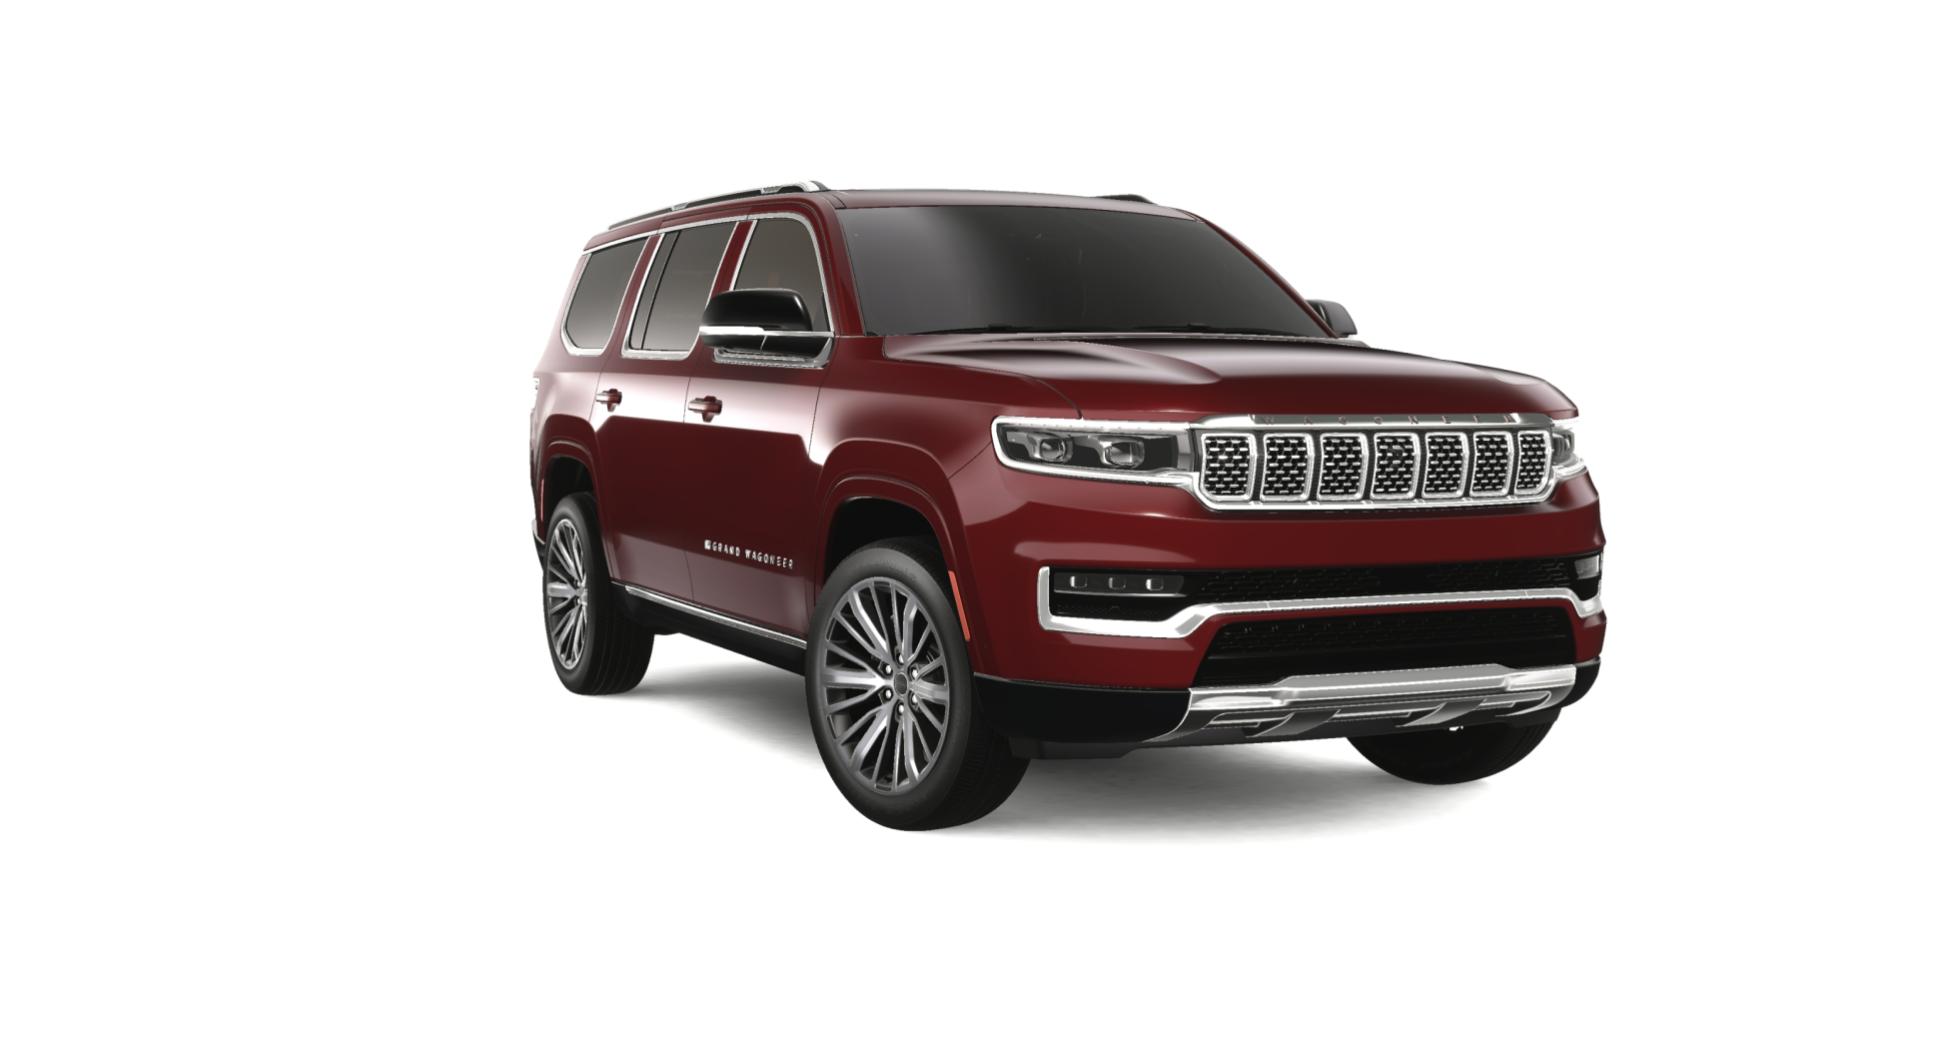 The 2023 Jeep Grand Wagoneer MSRP comes at $107,995. Visit Columbia Chrysler Dodge Jeep Ram FIAT to view a great range of new and used 2023 Jeep Wagoneers and get behind the wheel to experience the luxury of the 2023 Jeep Wagoneer Interior.